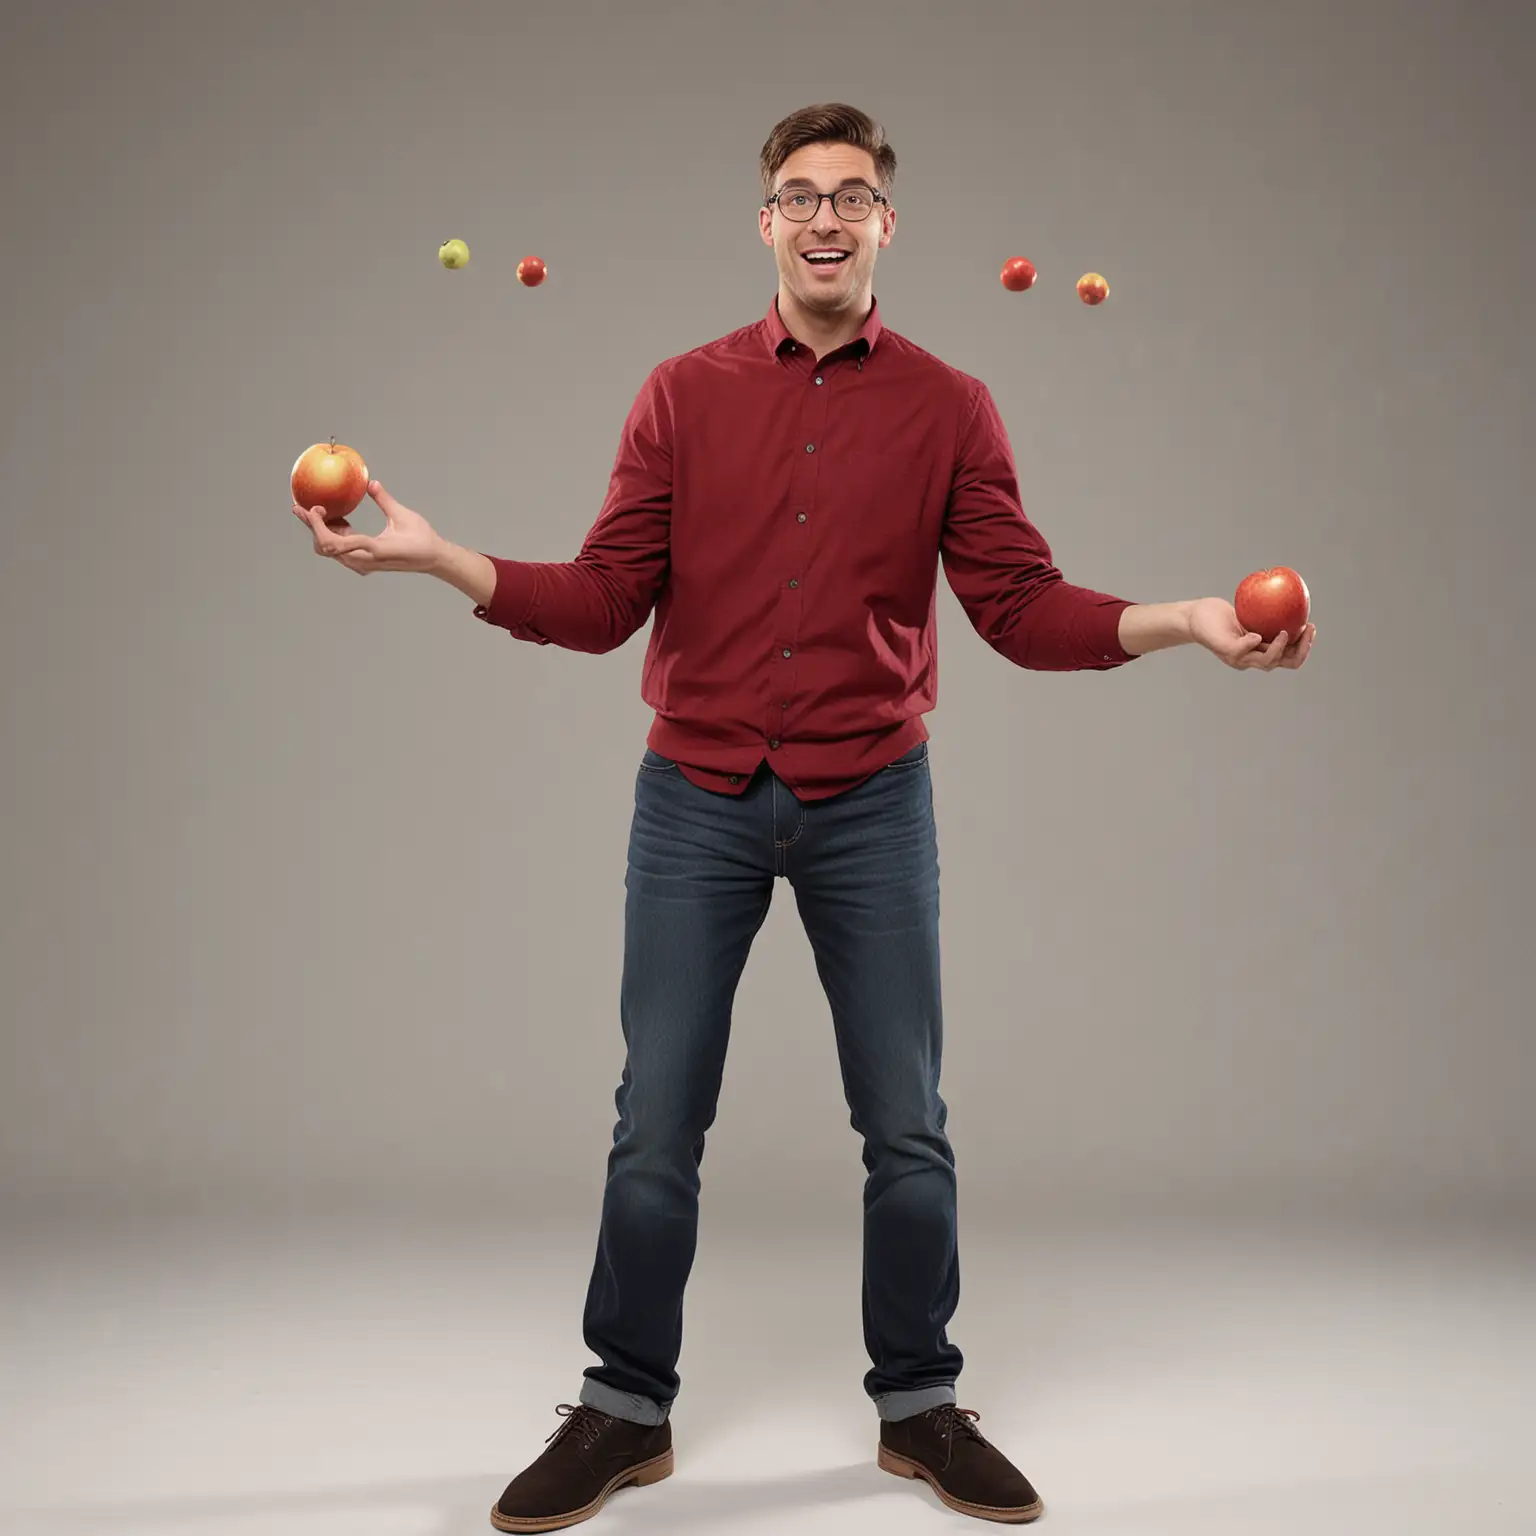 Host Juggling Apples with Comedic Mishap